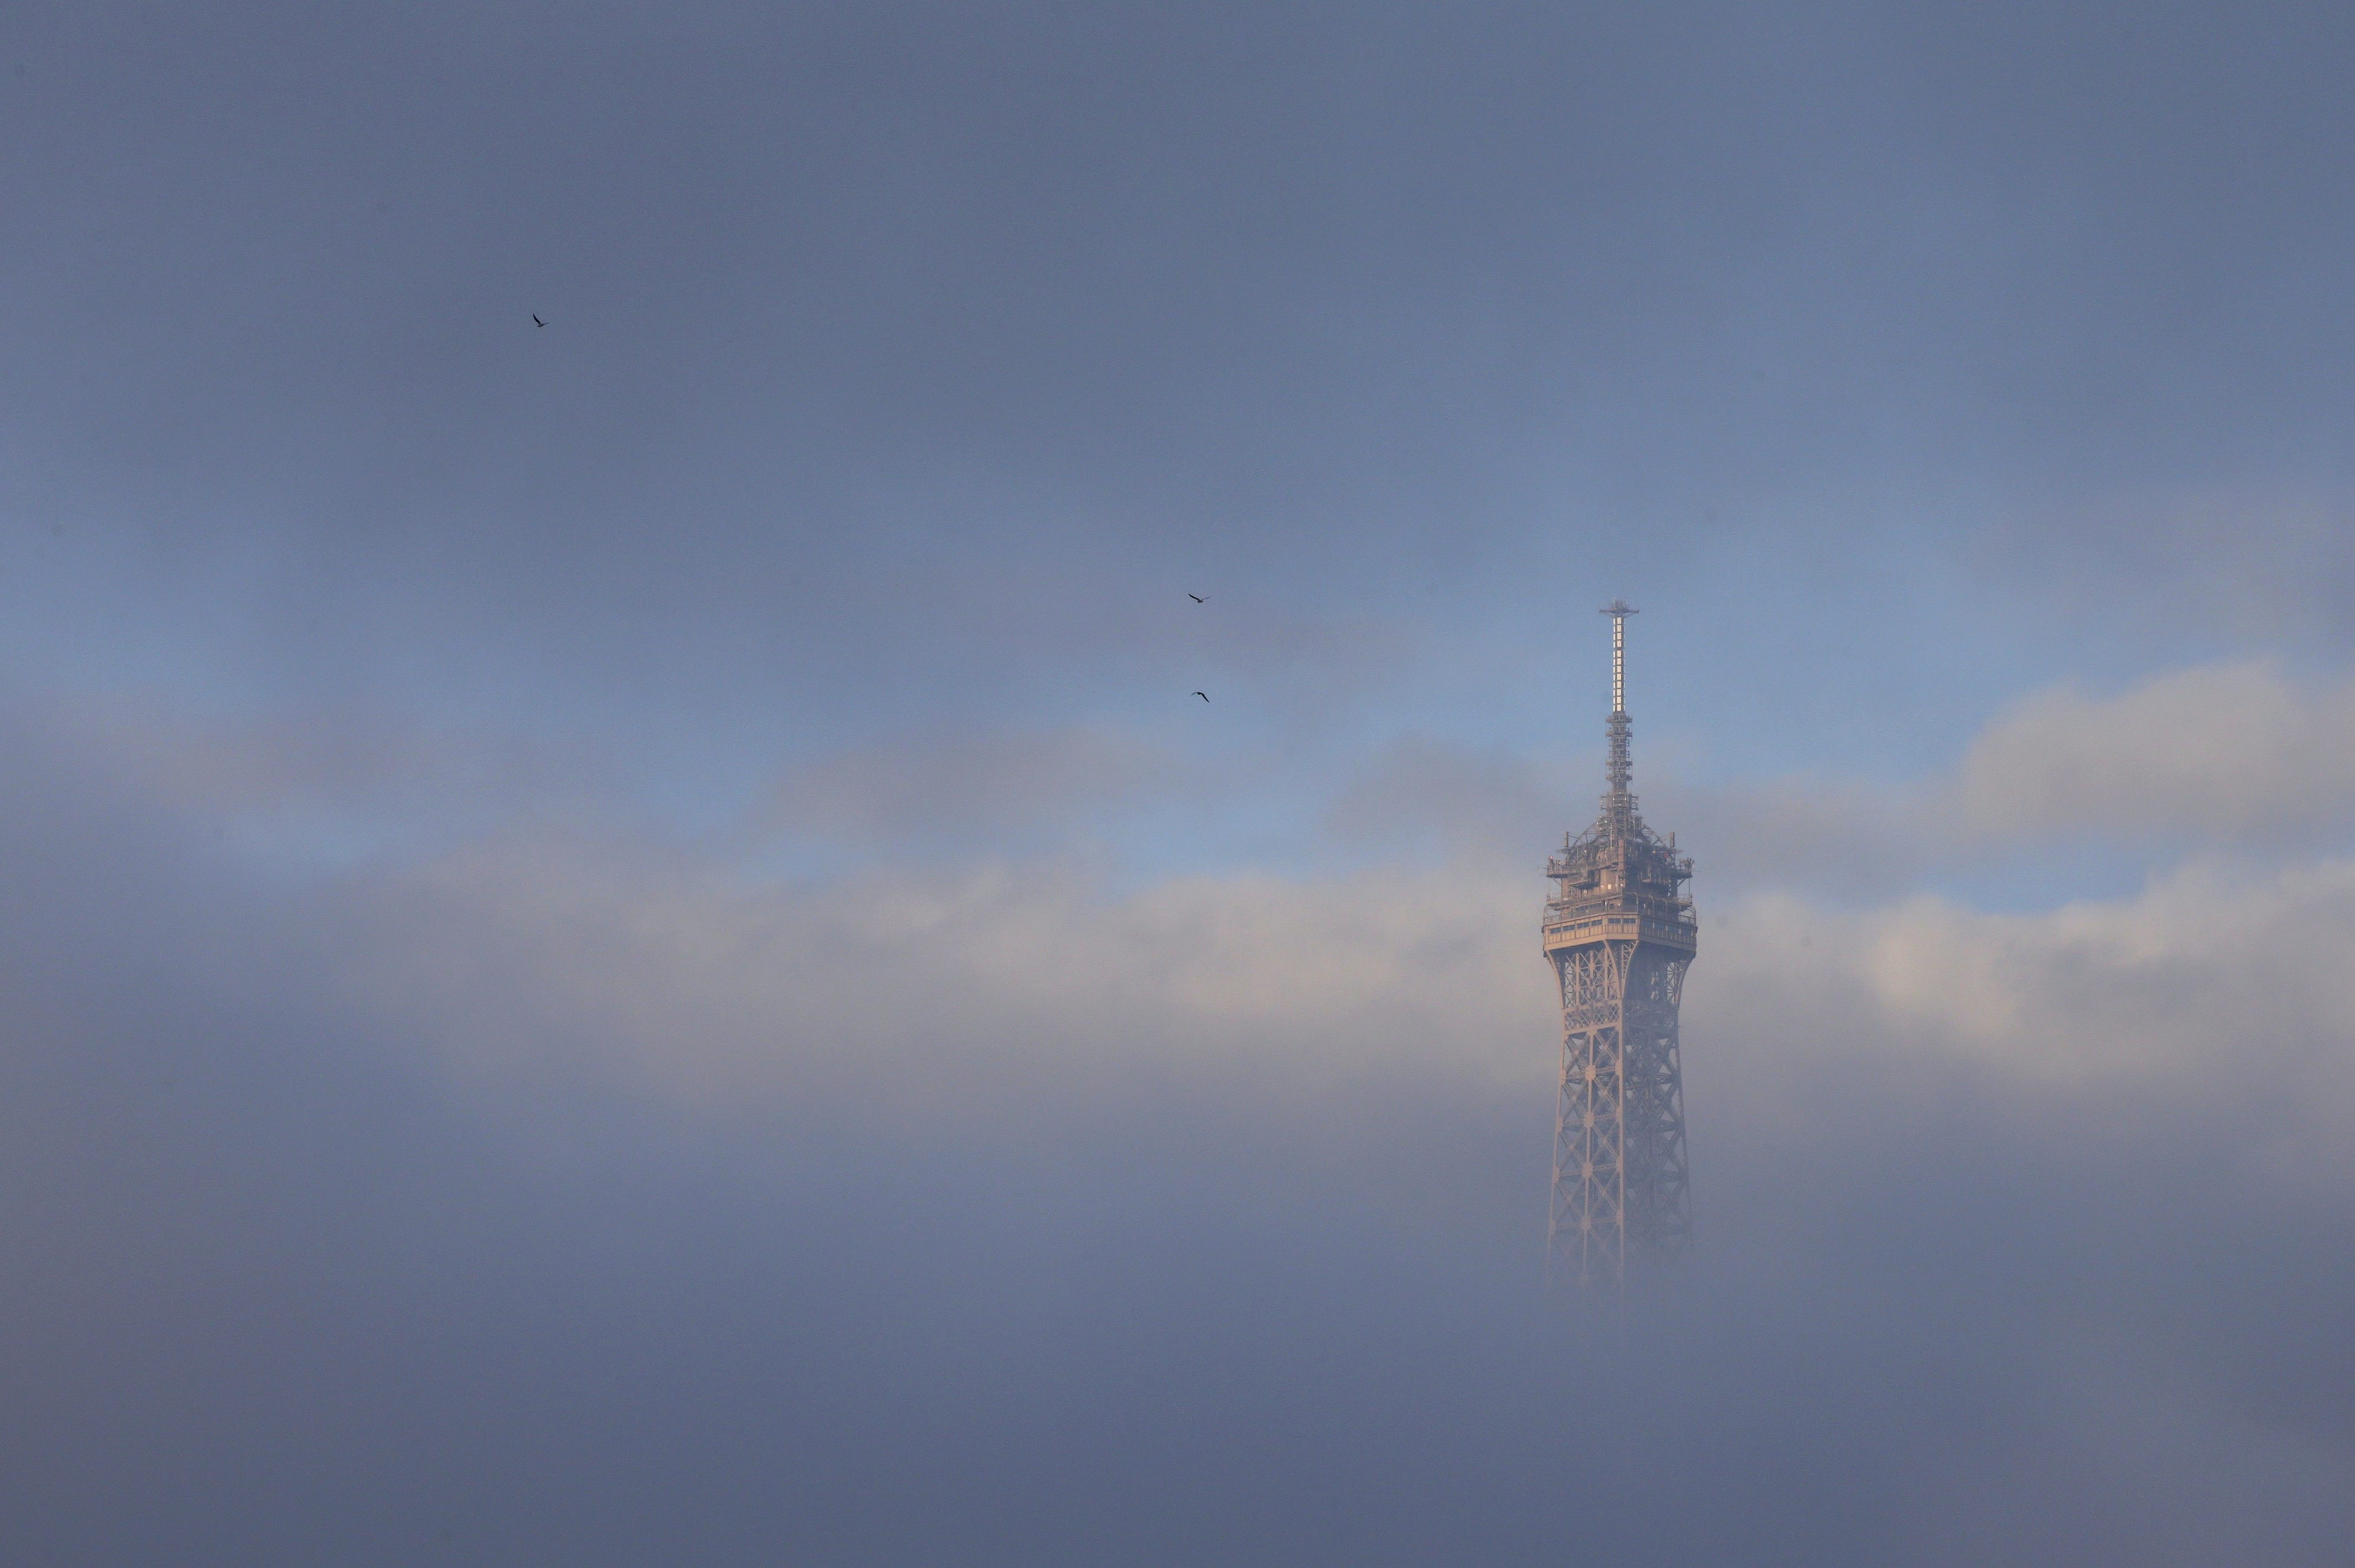 The Eiffel Tower is partially covered by an early morning fog in Paris, France, November 27, 2015 as the capital will host the World Climate Change Conference 2015 (COP21) from November 30 to December 11. REUTERS/Philippe Wojazer TPX IMAGES OF THE DAY